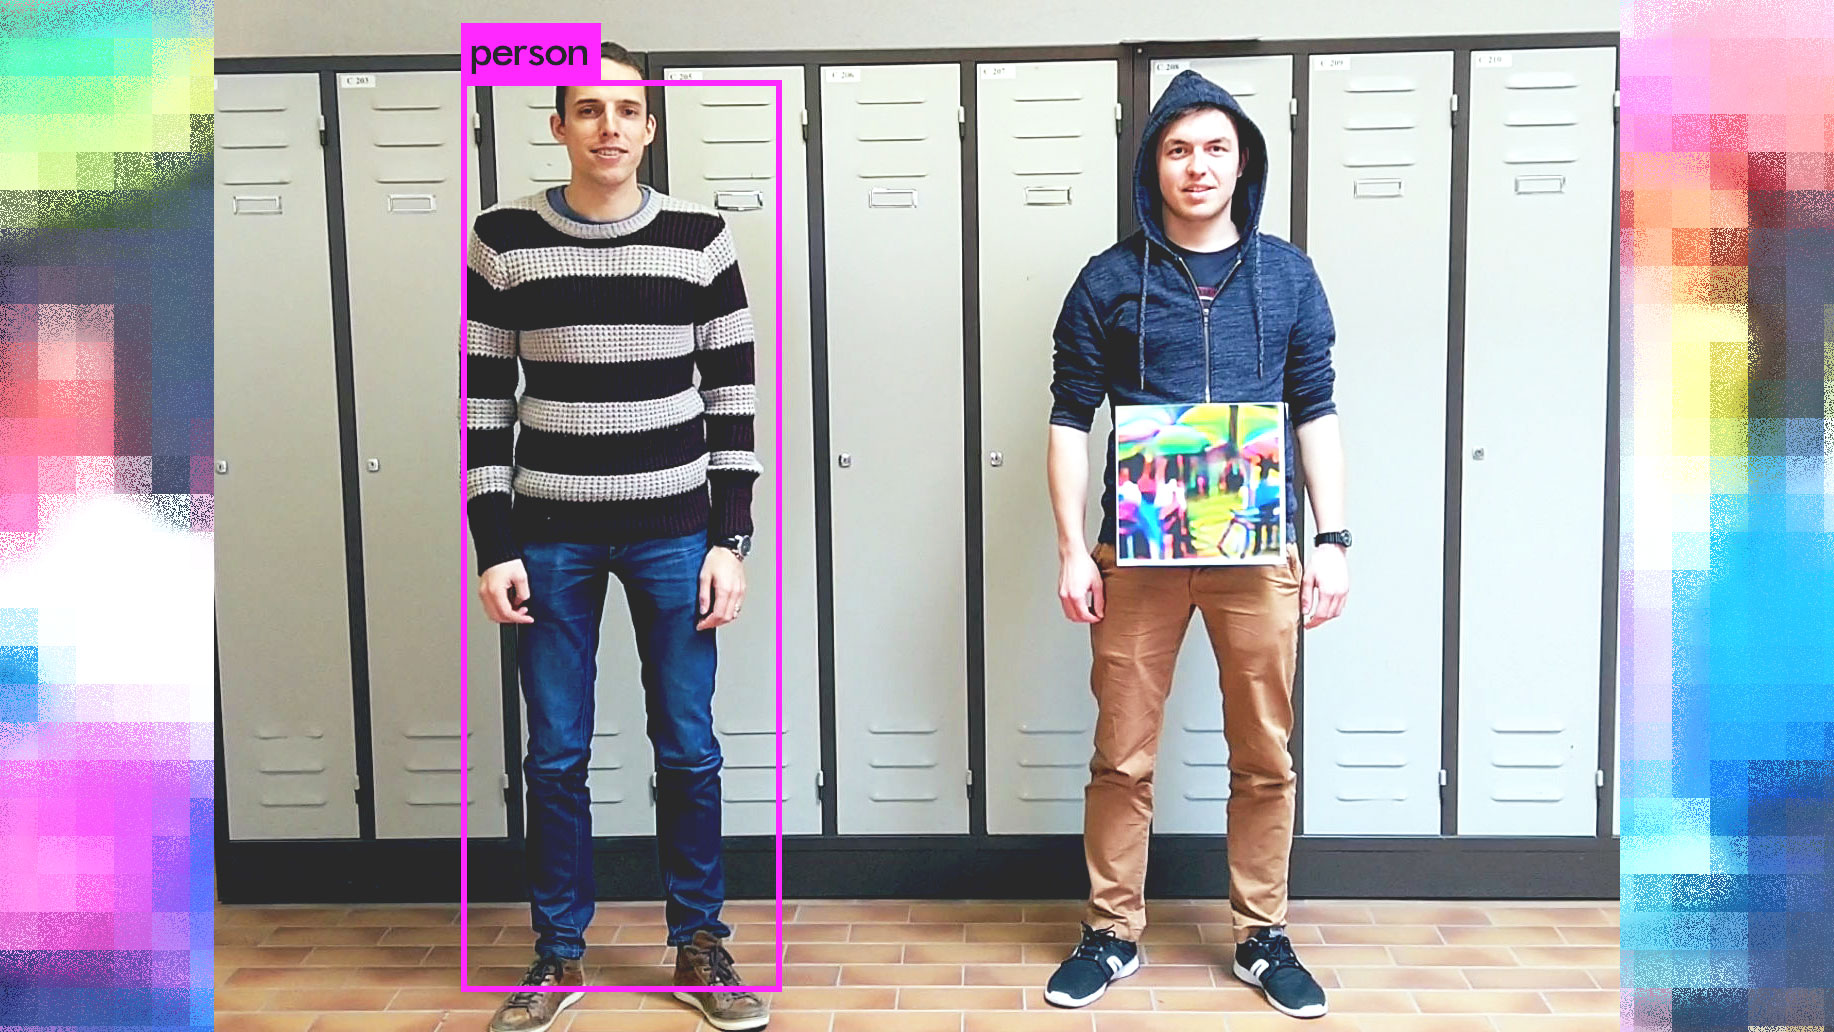 Adversarial machine learning fools image recognition software.